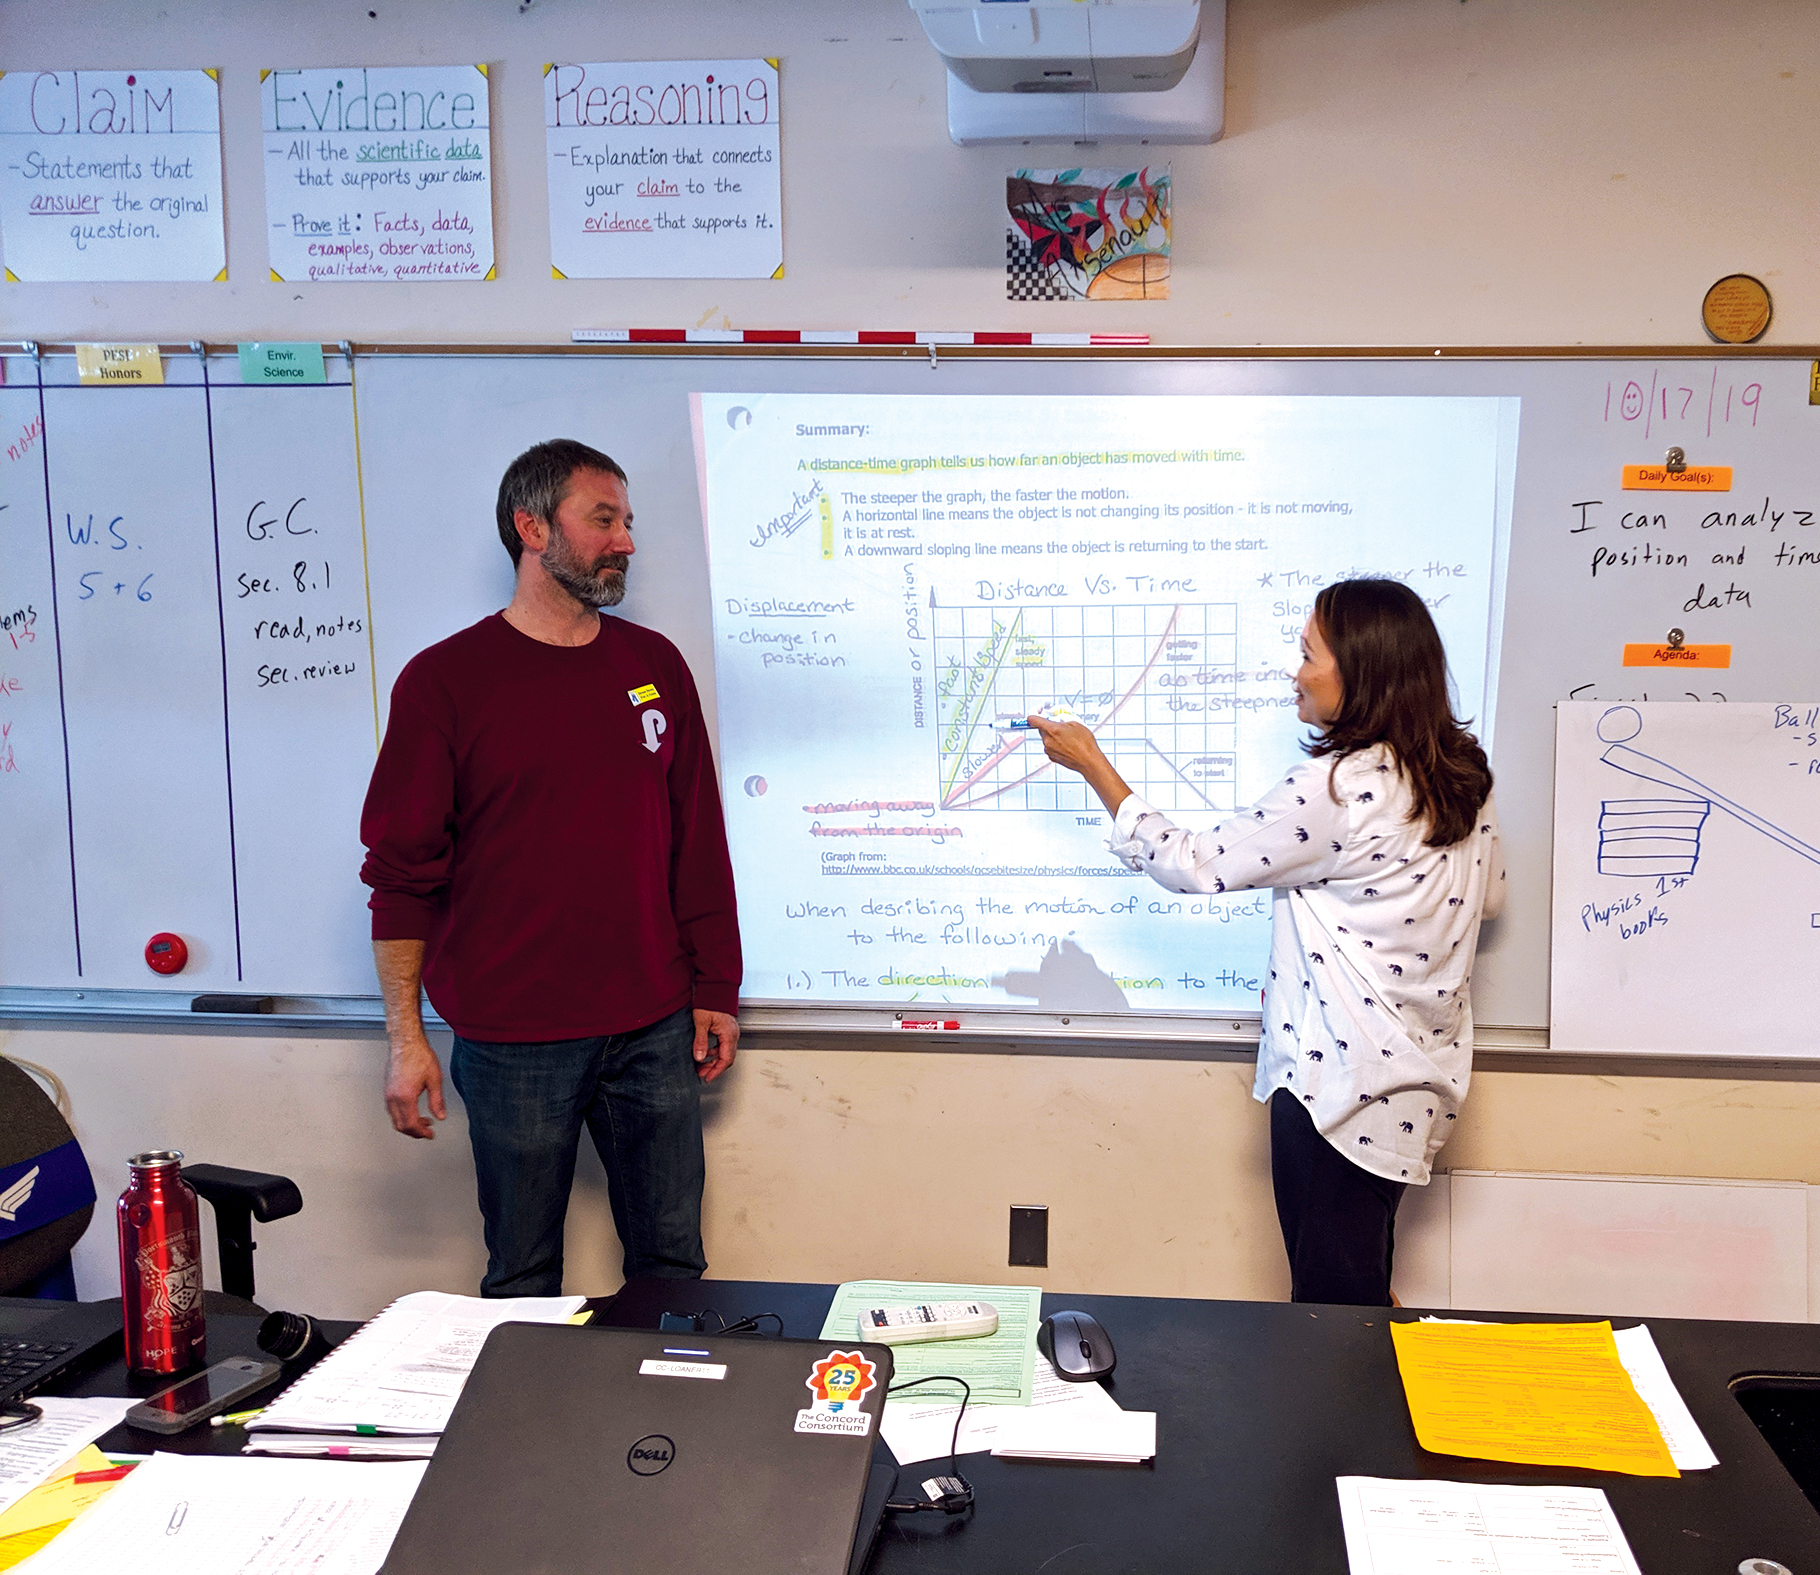 Co-teachers JP Arsenault and Michelle Murtha work together in front of the class.